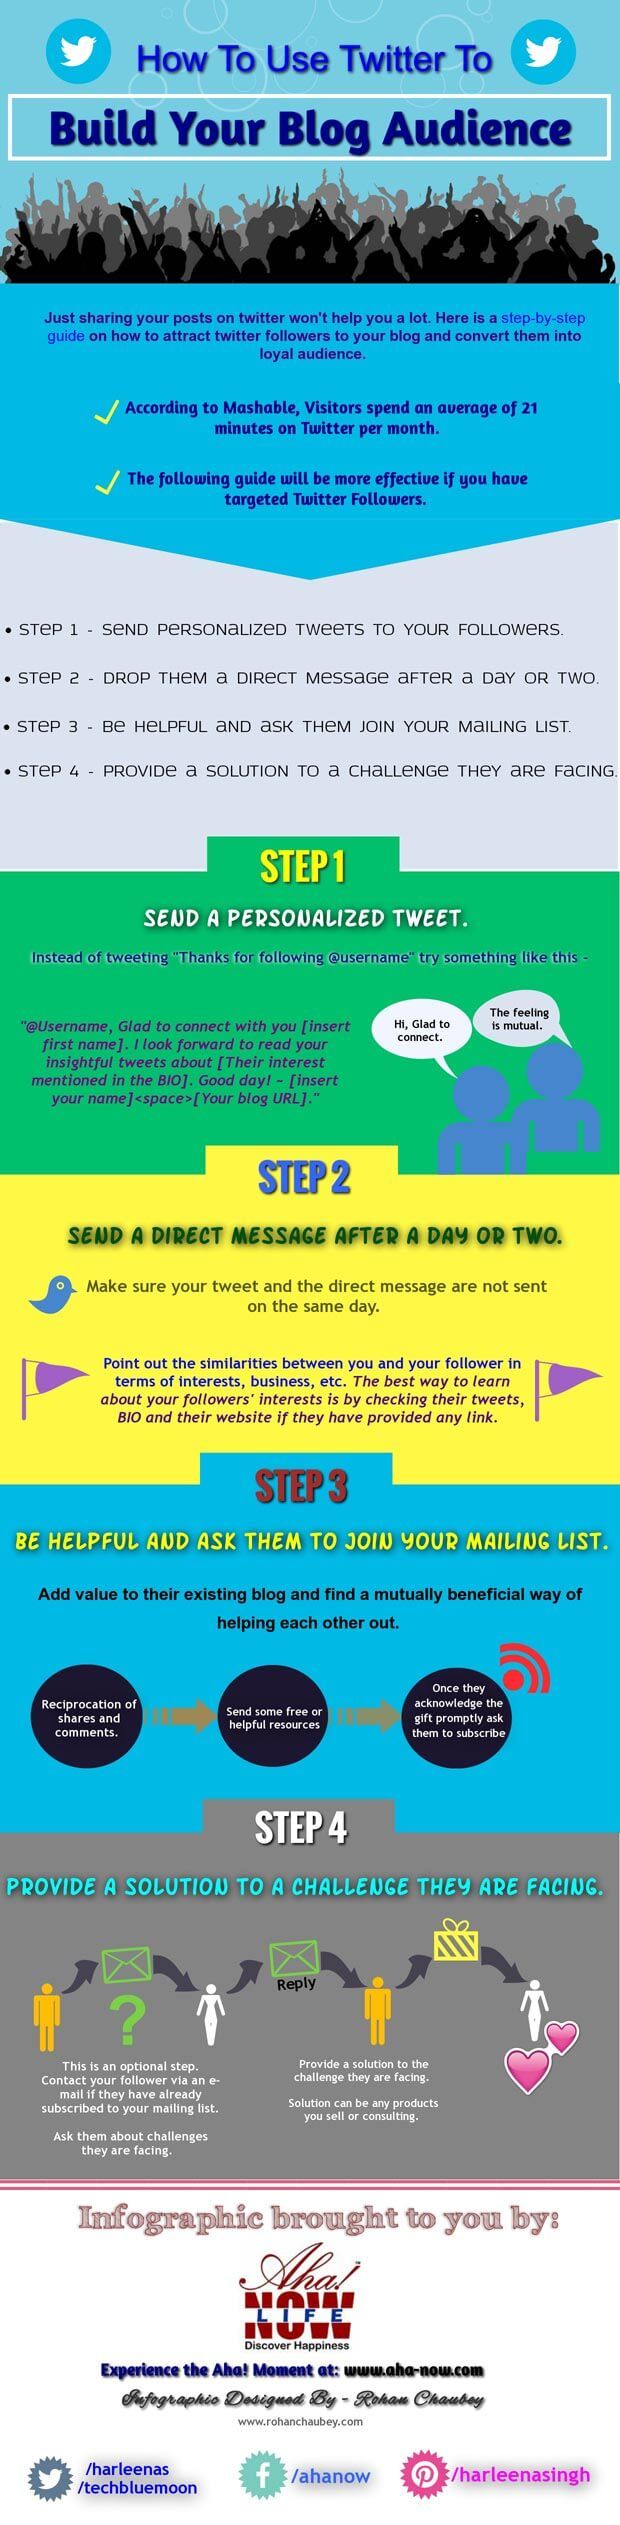 Infographic on using Twitter to build a blog audience